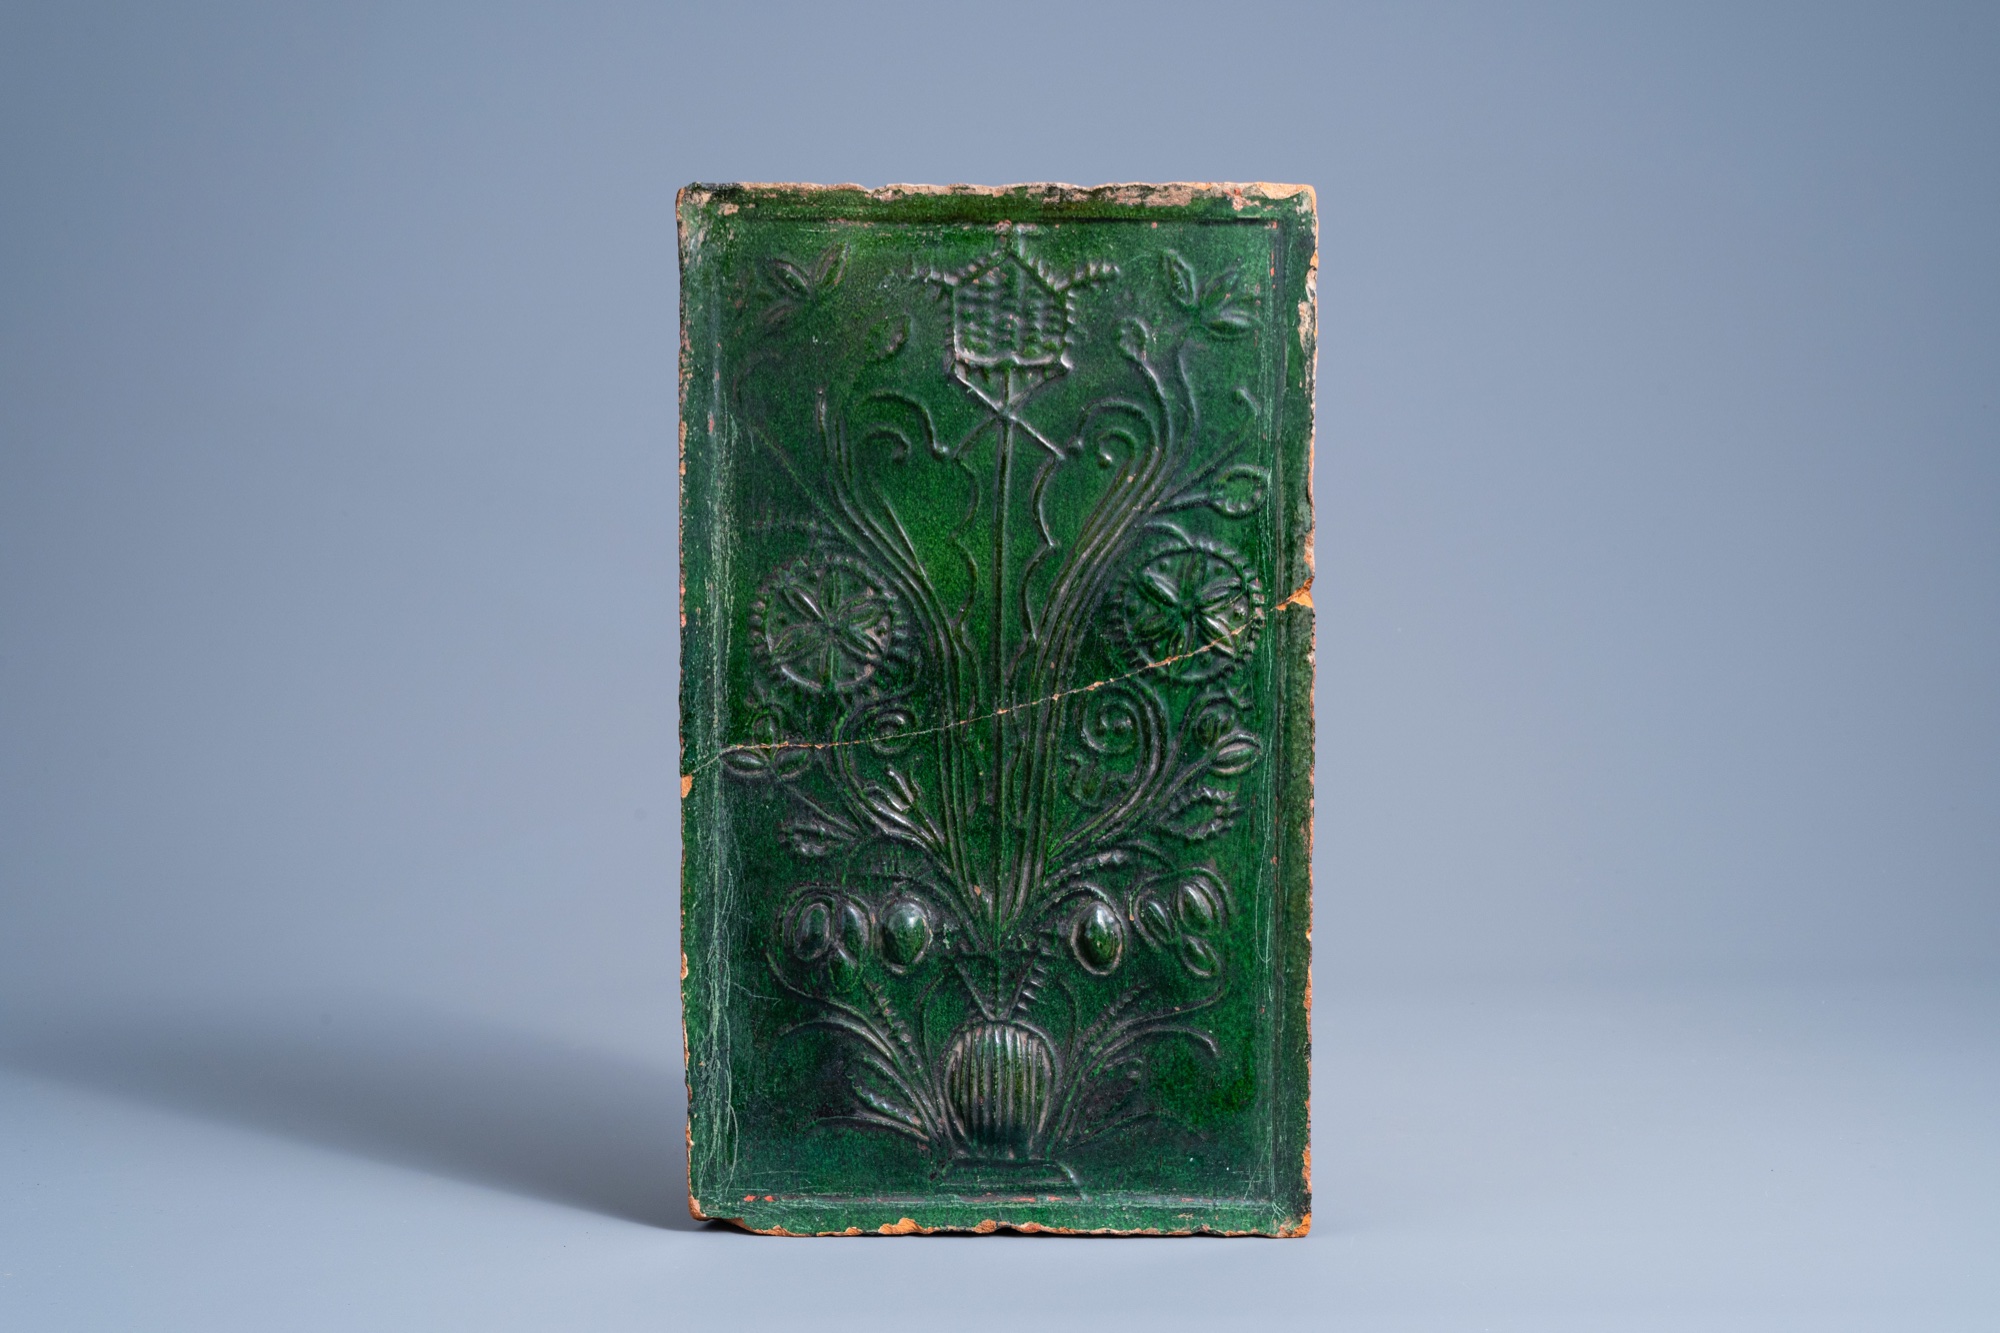 A German green glazed earthenware stove tile with floral design, 16th/17th C.